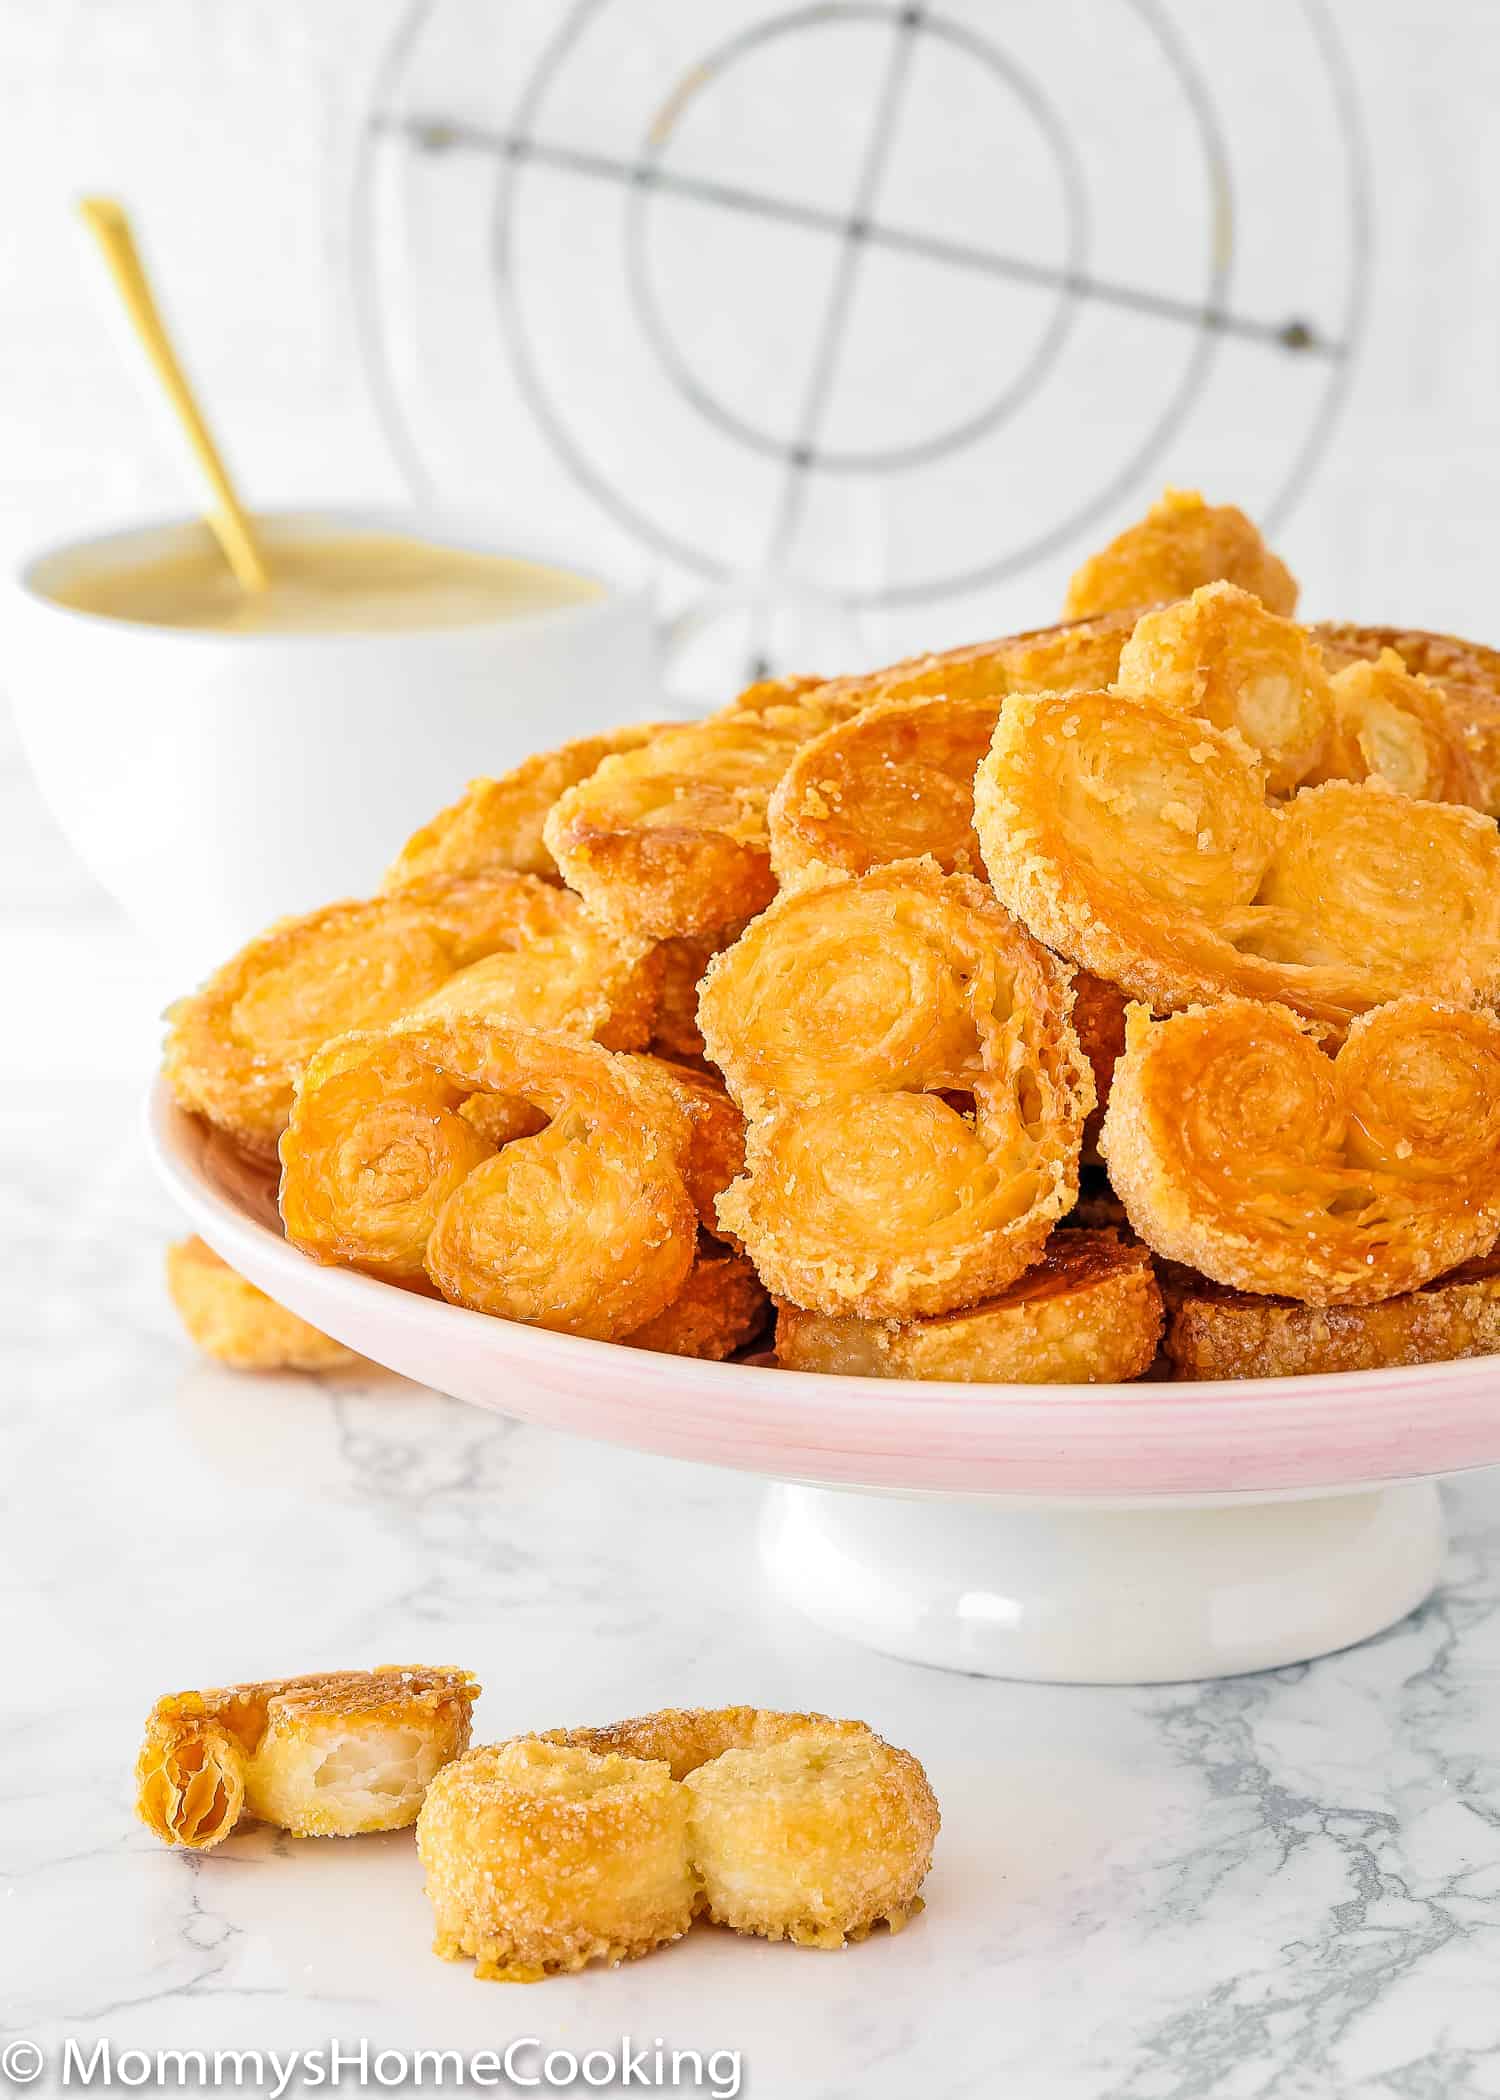 This Easy Palmiers recipe, made with just 2 ingredients, is one of my family’s all-time favorite treats! Perfect to share with family and friends during “Cafecito“ time. https://mommyshomecooking.com